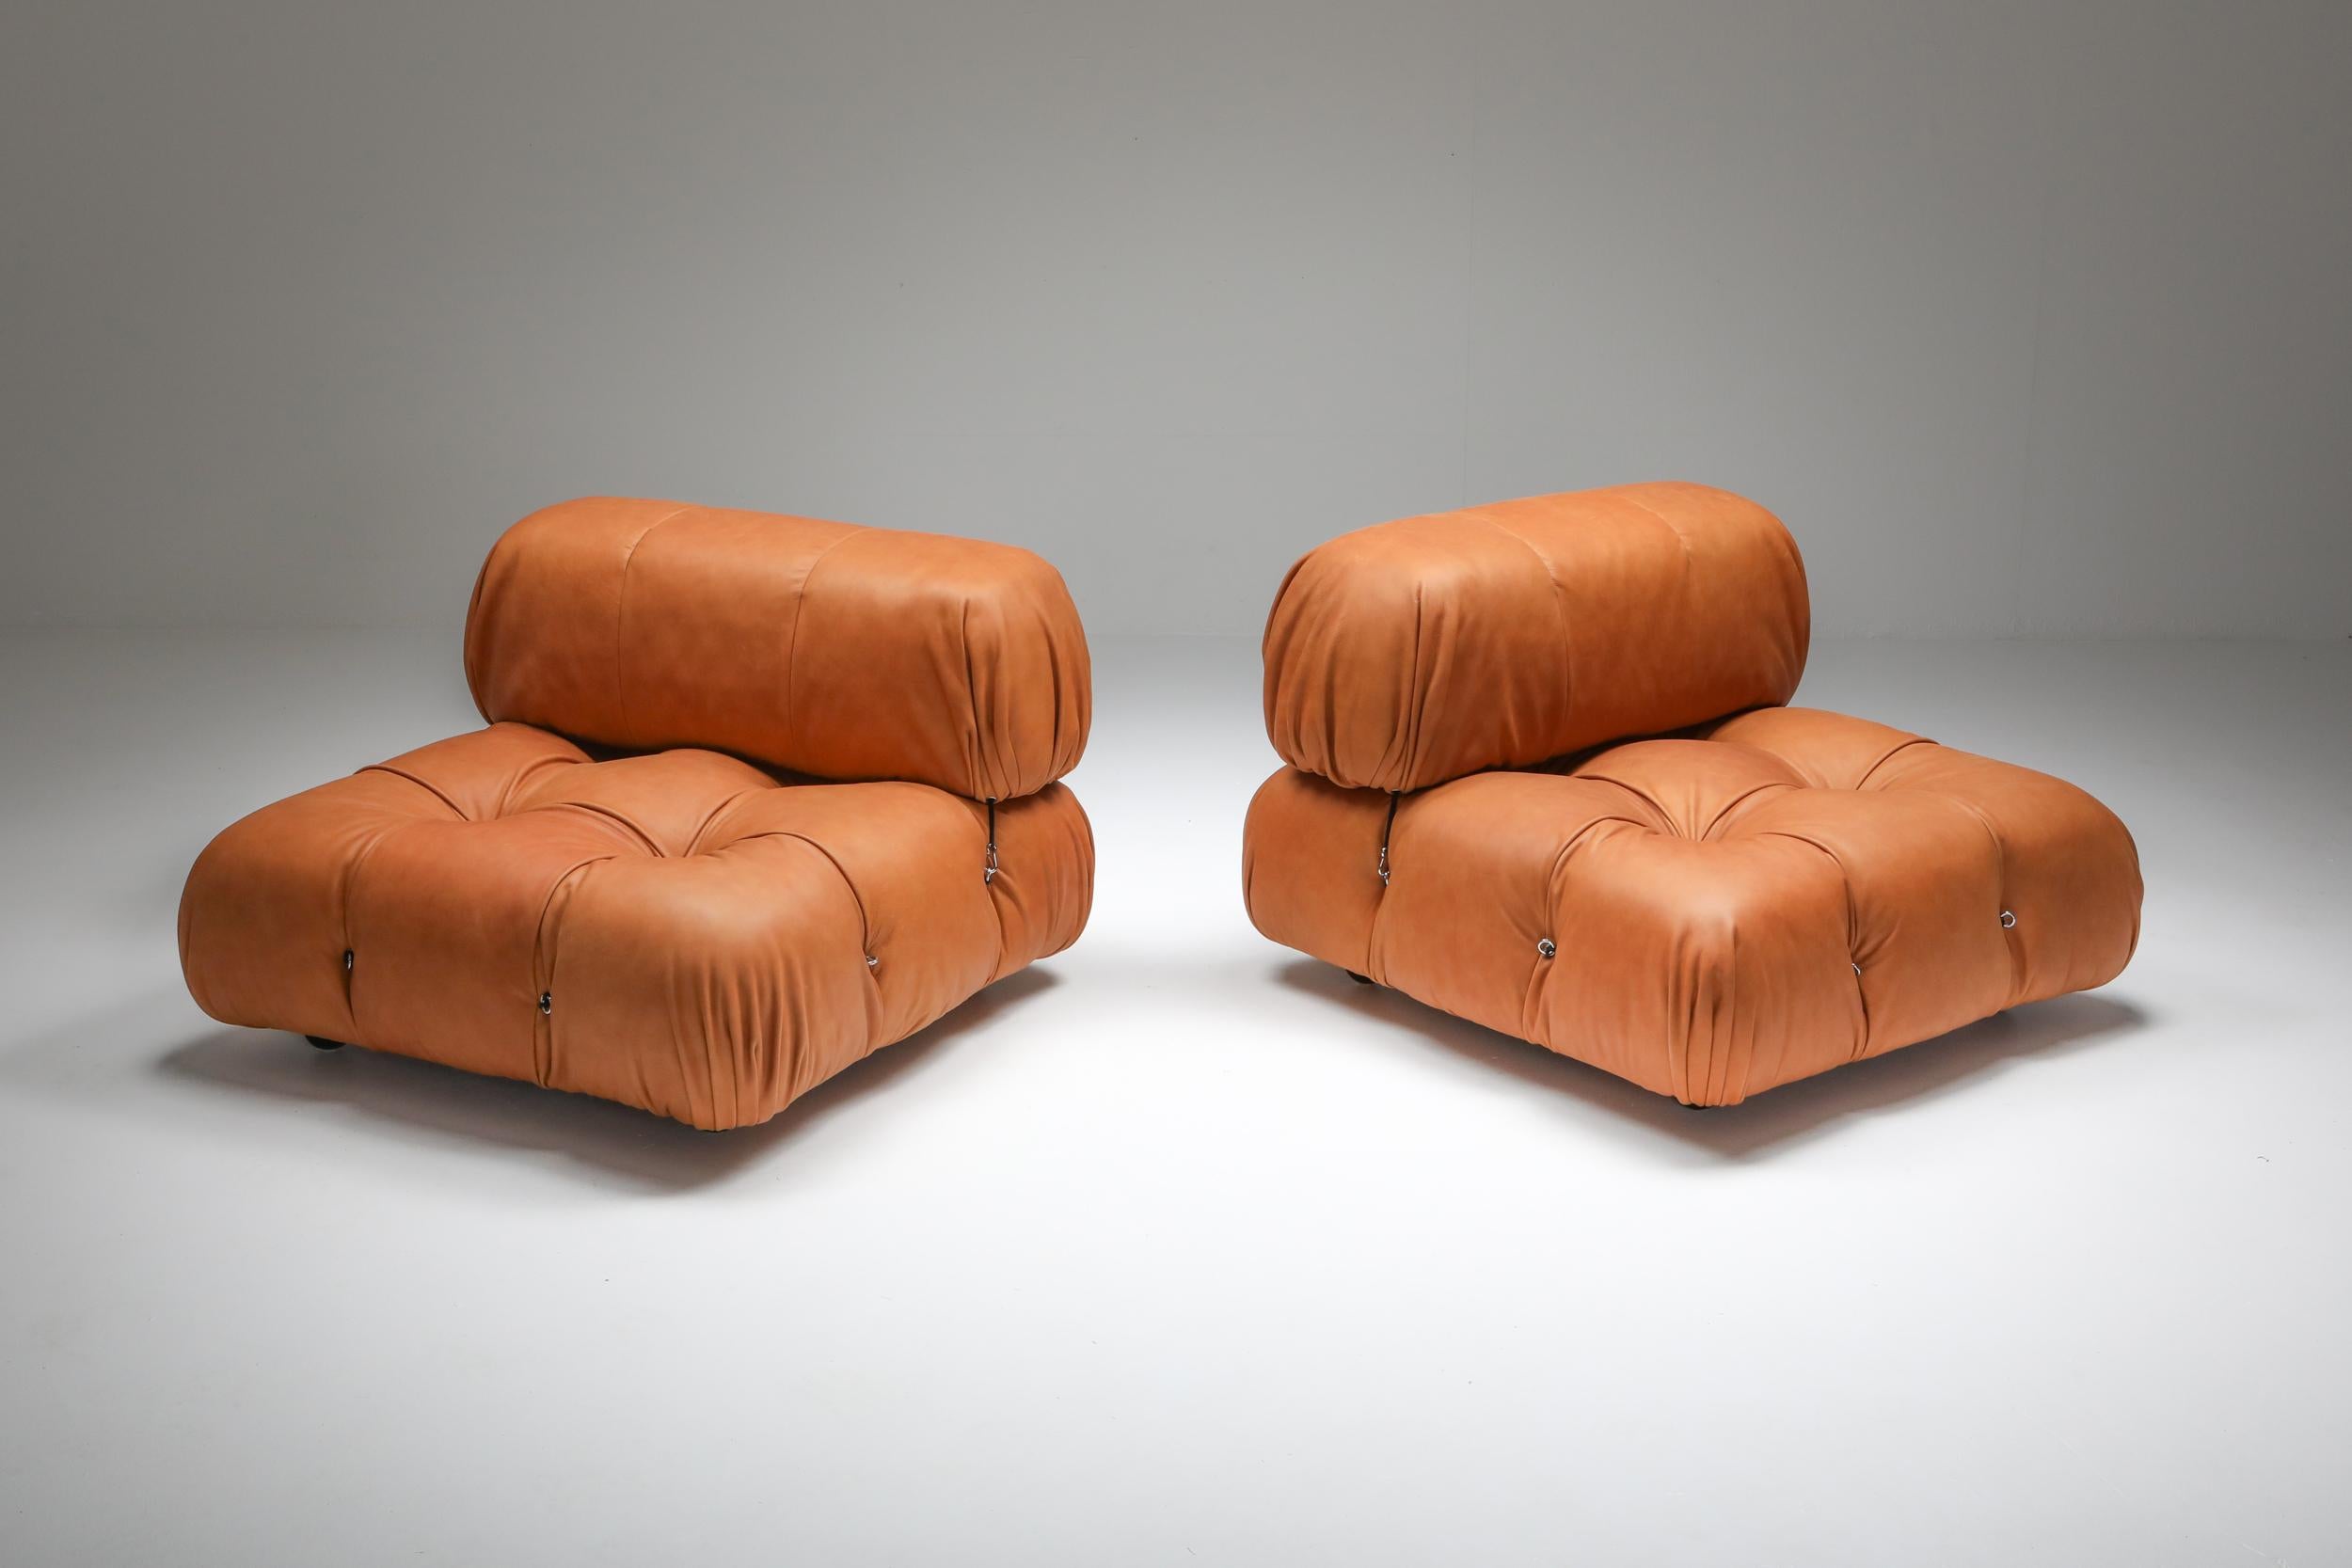 Mario Bellini pair of 'Camaleonda' original lounge chairs, newly upholstered, cognac leather, B&B Italia, 1970s

We can offer a variety in set-ups 
Create your dream modular sectional couch in a leather or fabric of choice.

Postmodern